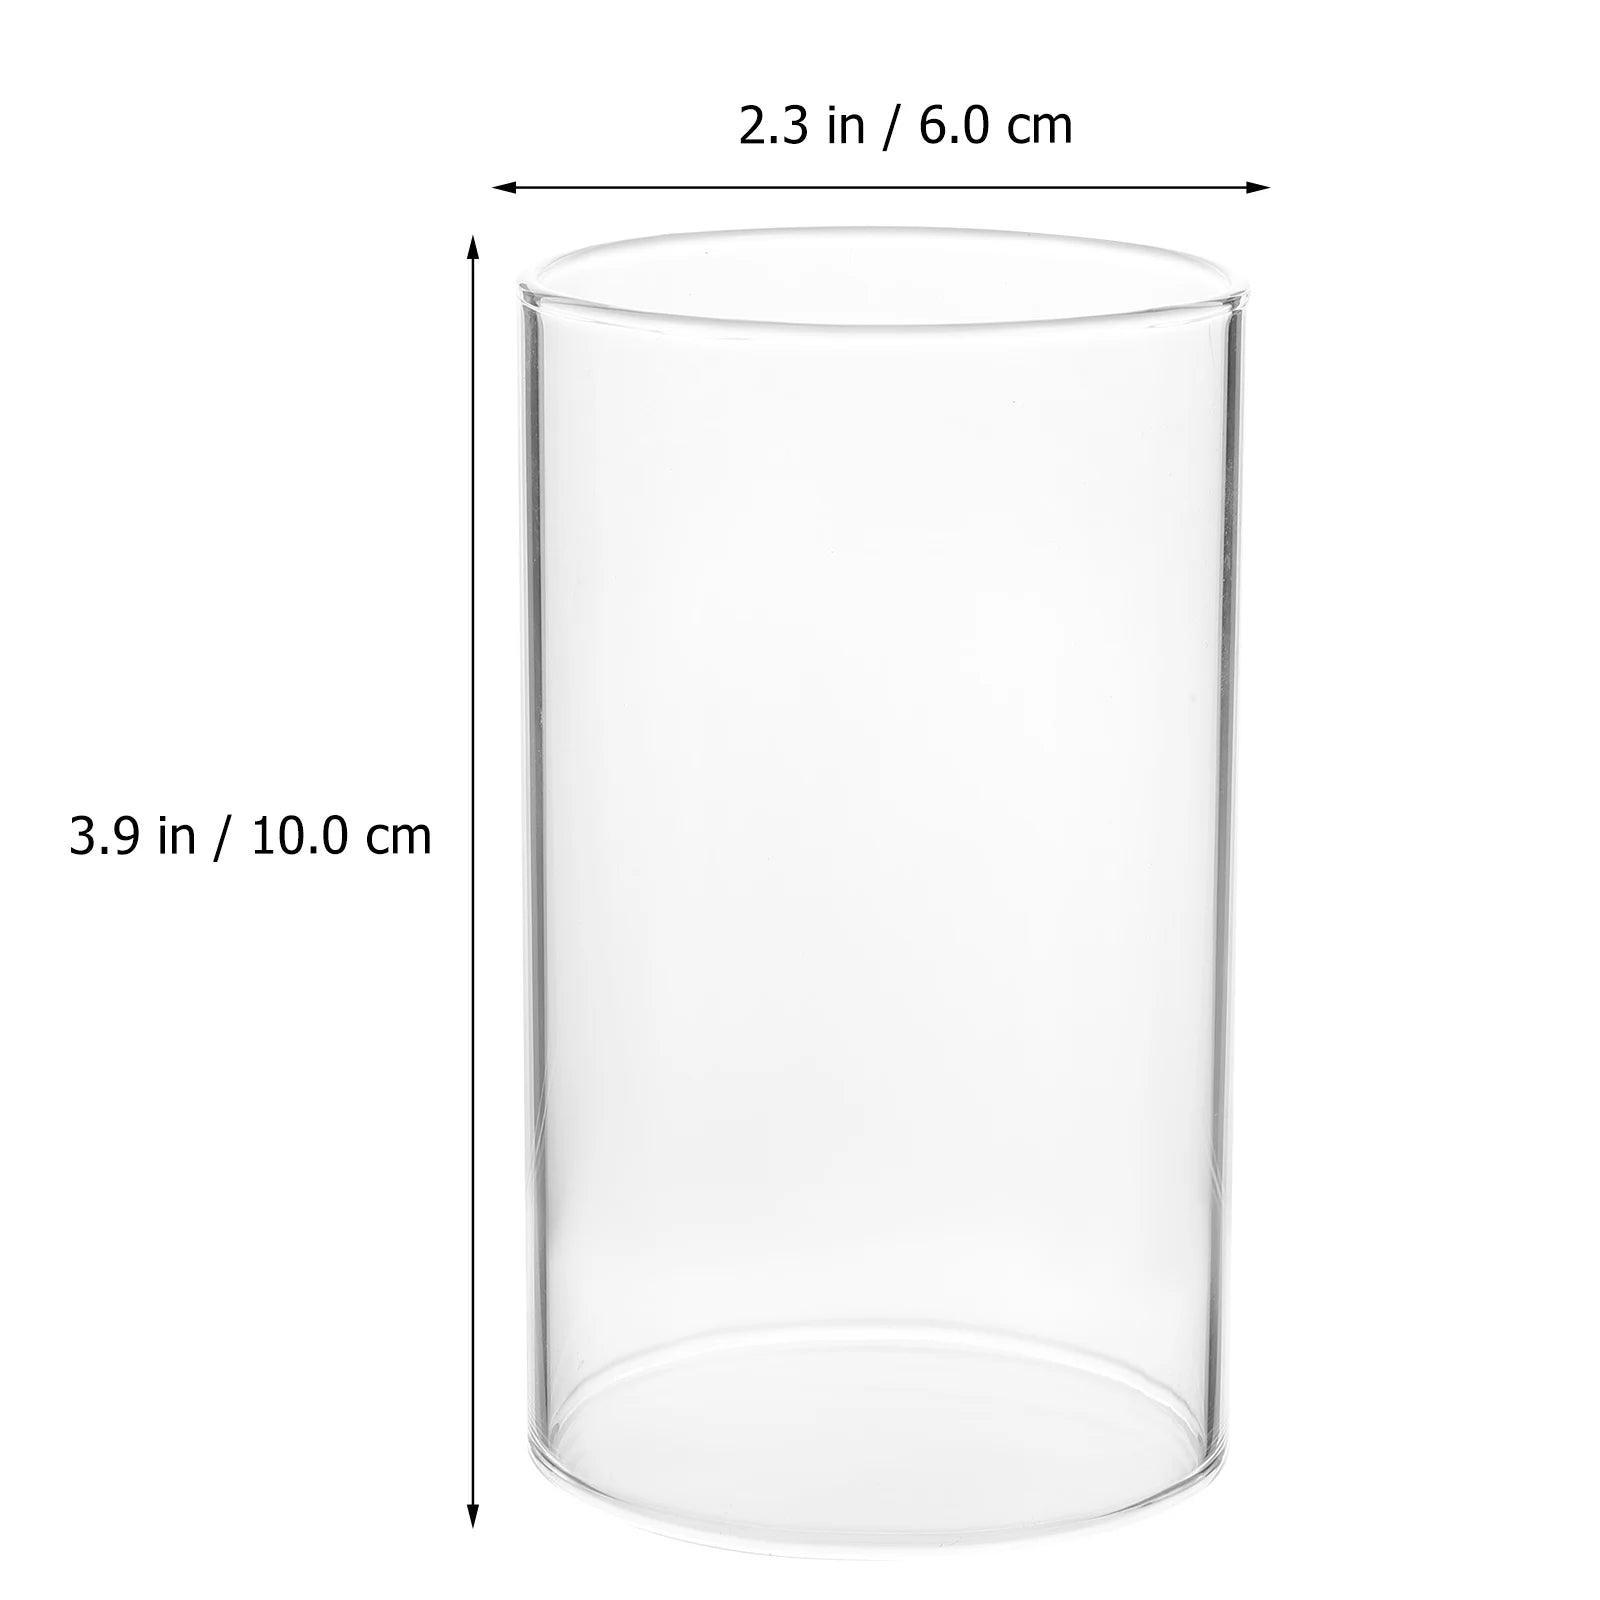 4Pcs Transparent Cover Dustproof Shade Windproof Cup Cylinder Glass Cover Glass Cover for Protecting Decor - Specialty Shades